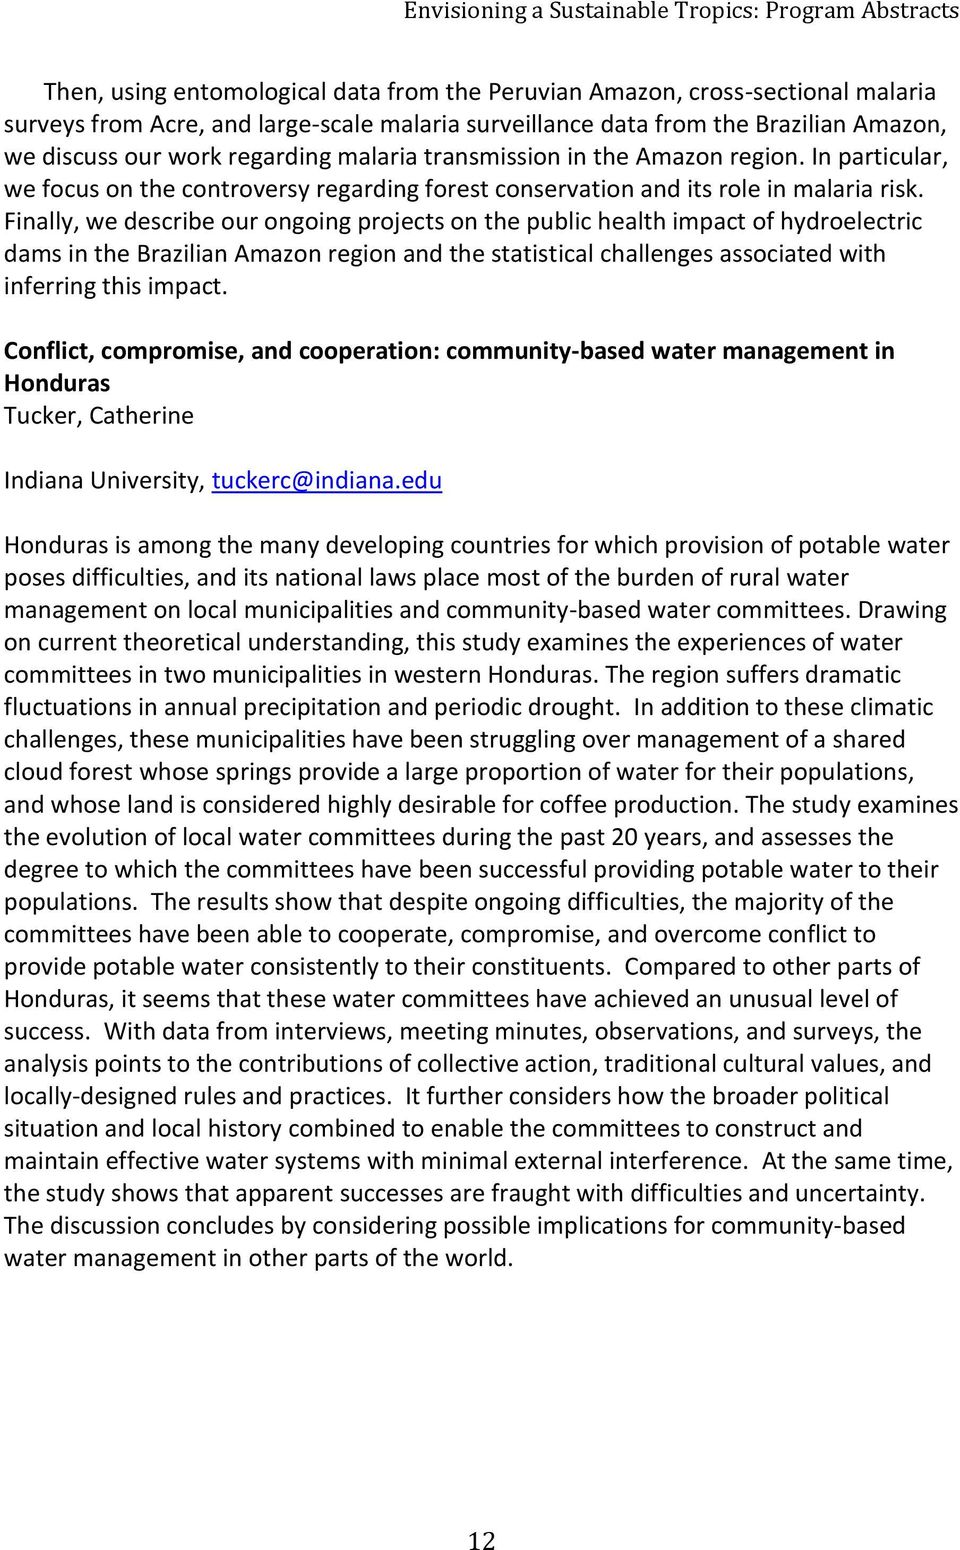 Finally, we describe our ongoing projects on the public health impact of hydroelectric dams in the Brazilian Amazon region and the statistical challenges associated with inferring this impact.